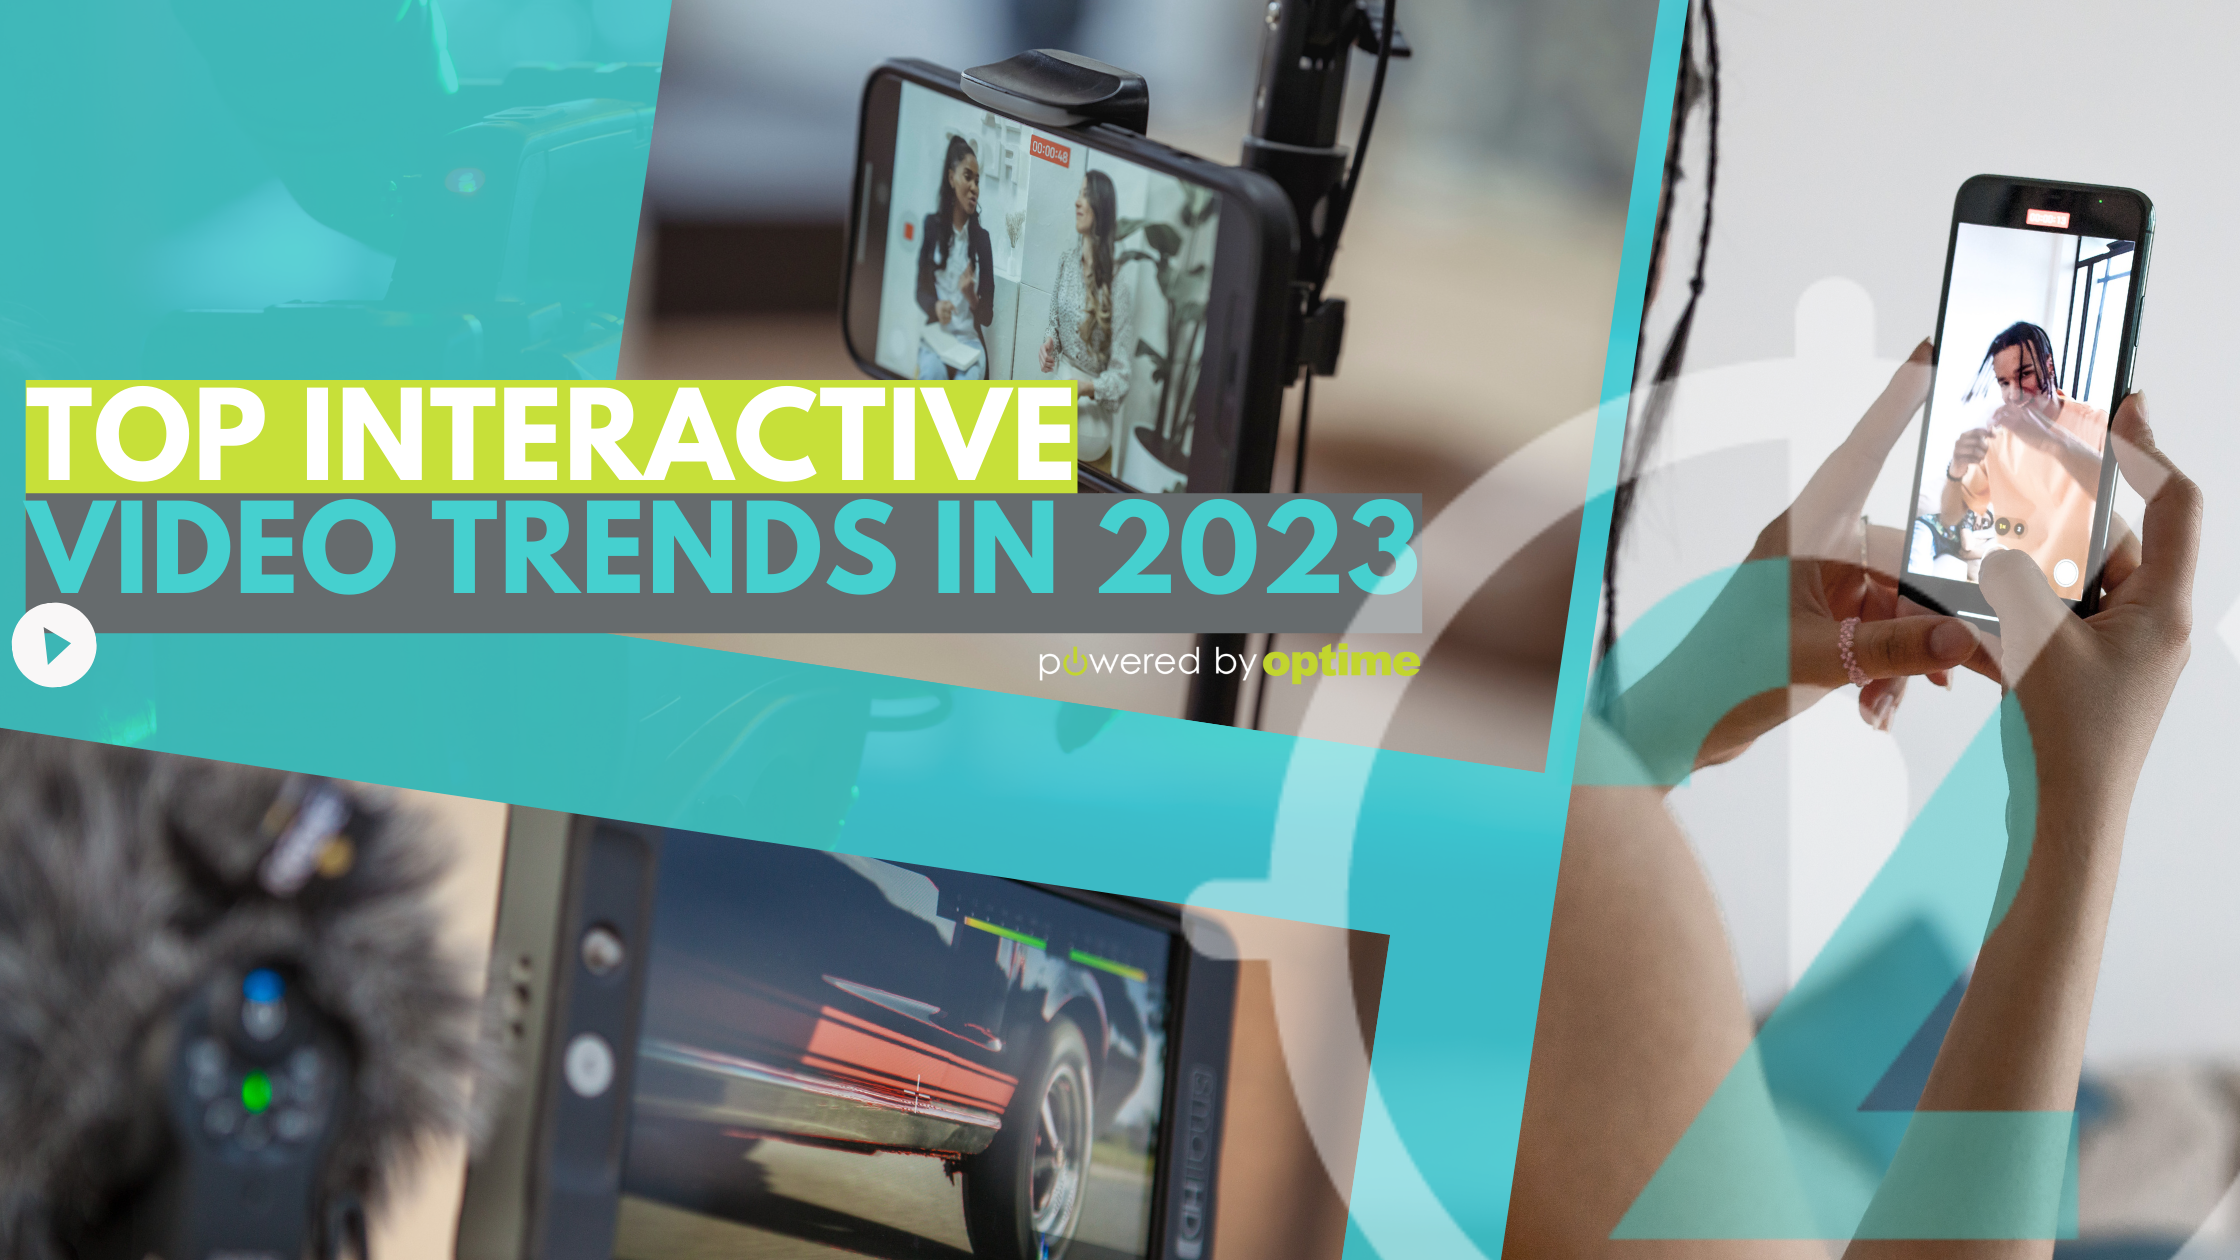 The Top Interactive Video Trends in 2023